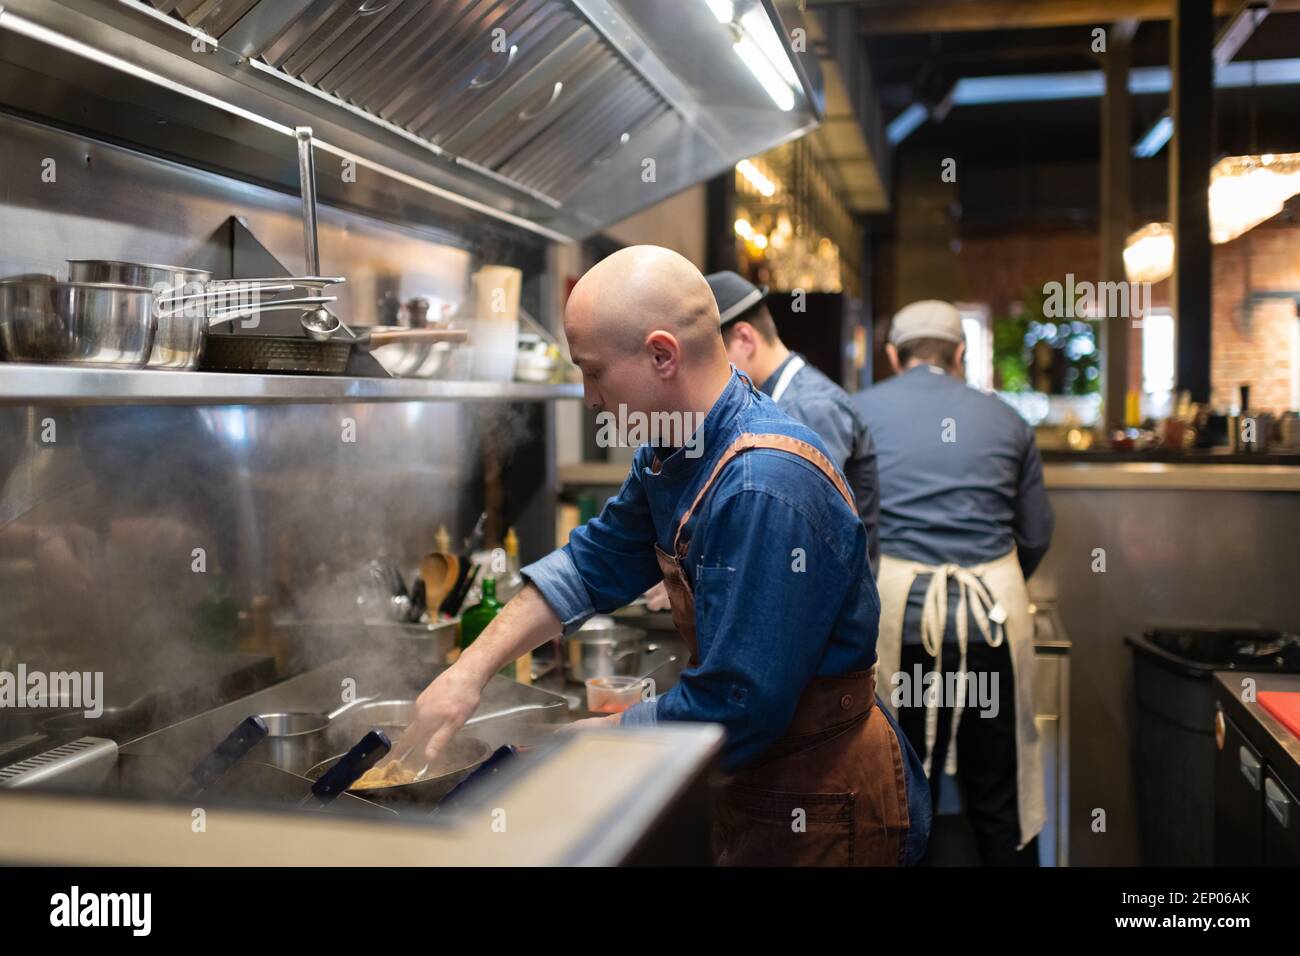 Bald man using tongs to mix pasta on frying pan while cooking in kitchen of cafe Stock Photo